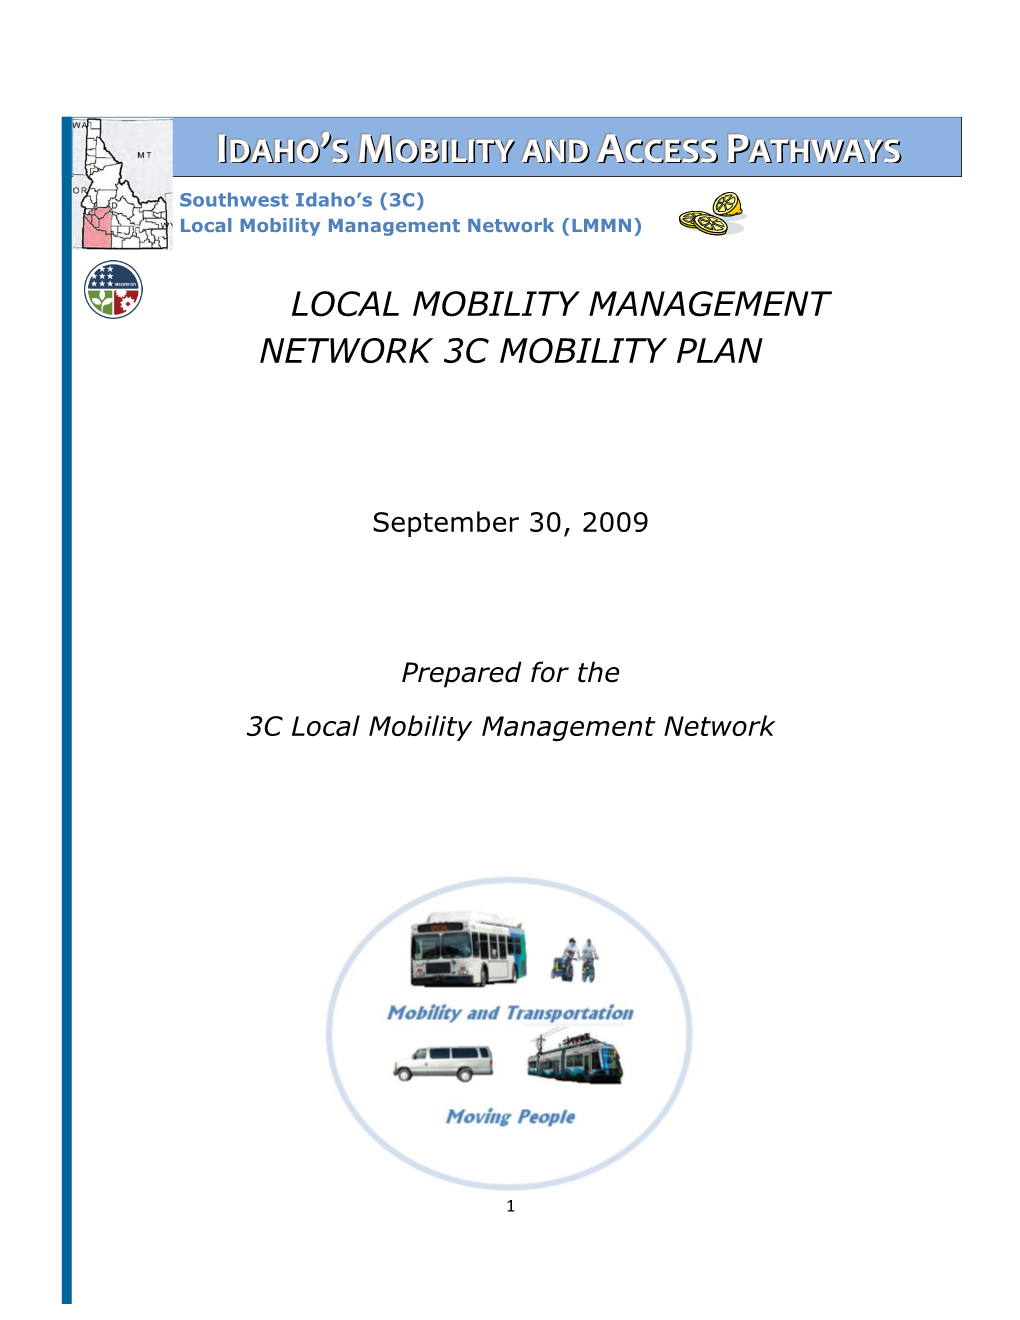 2009 Local Mobility Management Network 3C Mobility Plan